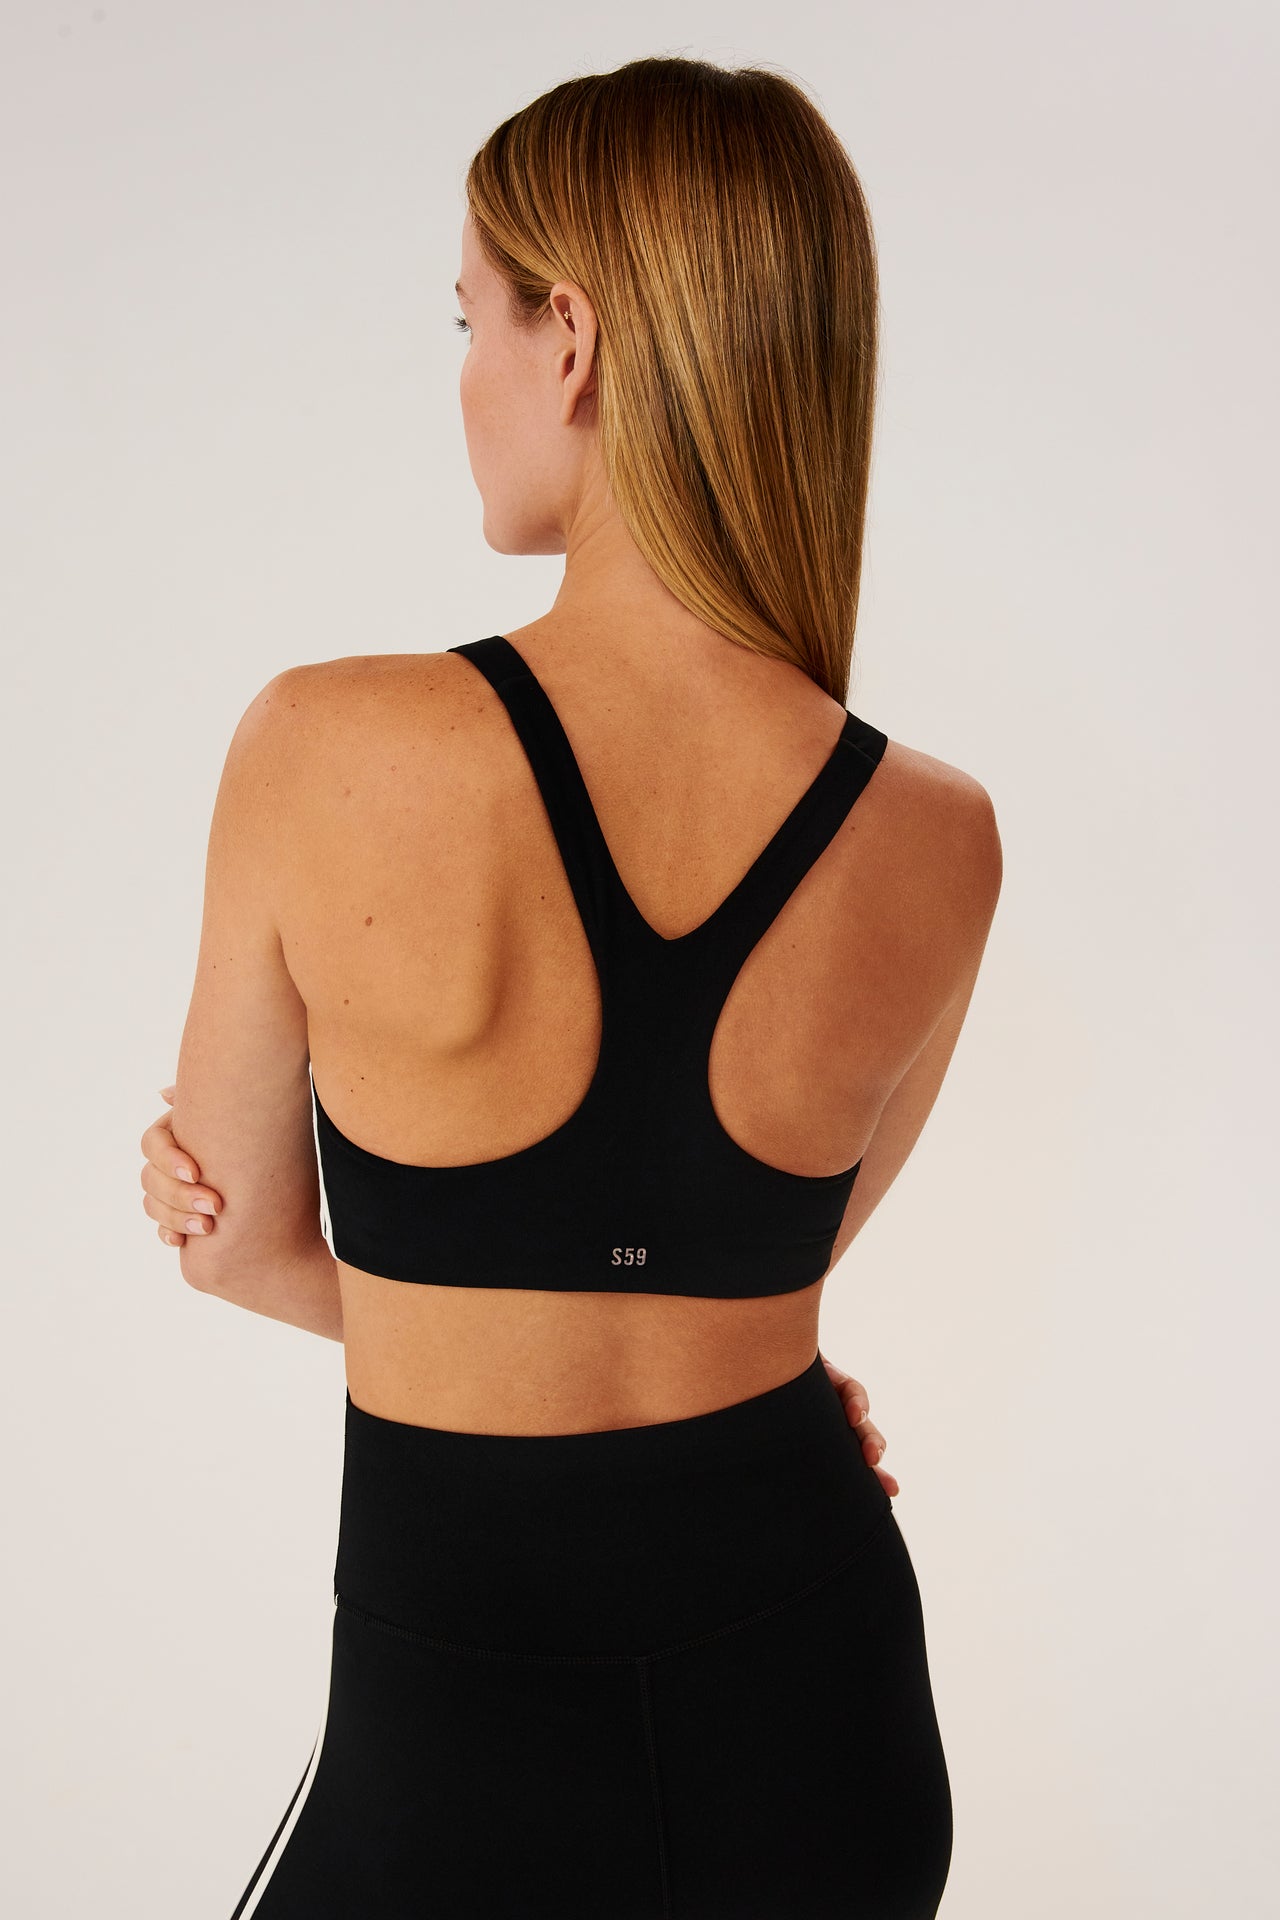 Back view of girl wearing black sports bra with two thin white stripes  down the side and black leggings